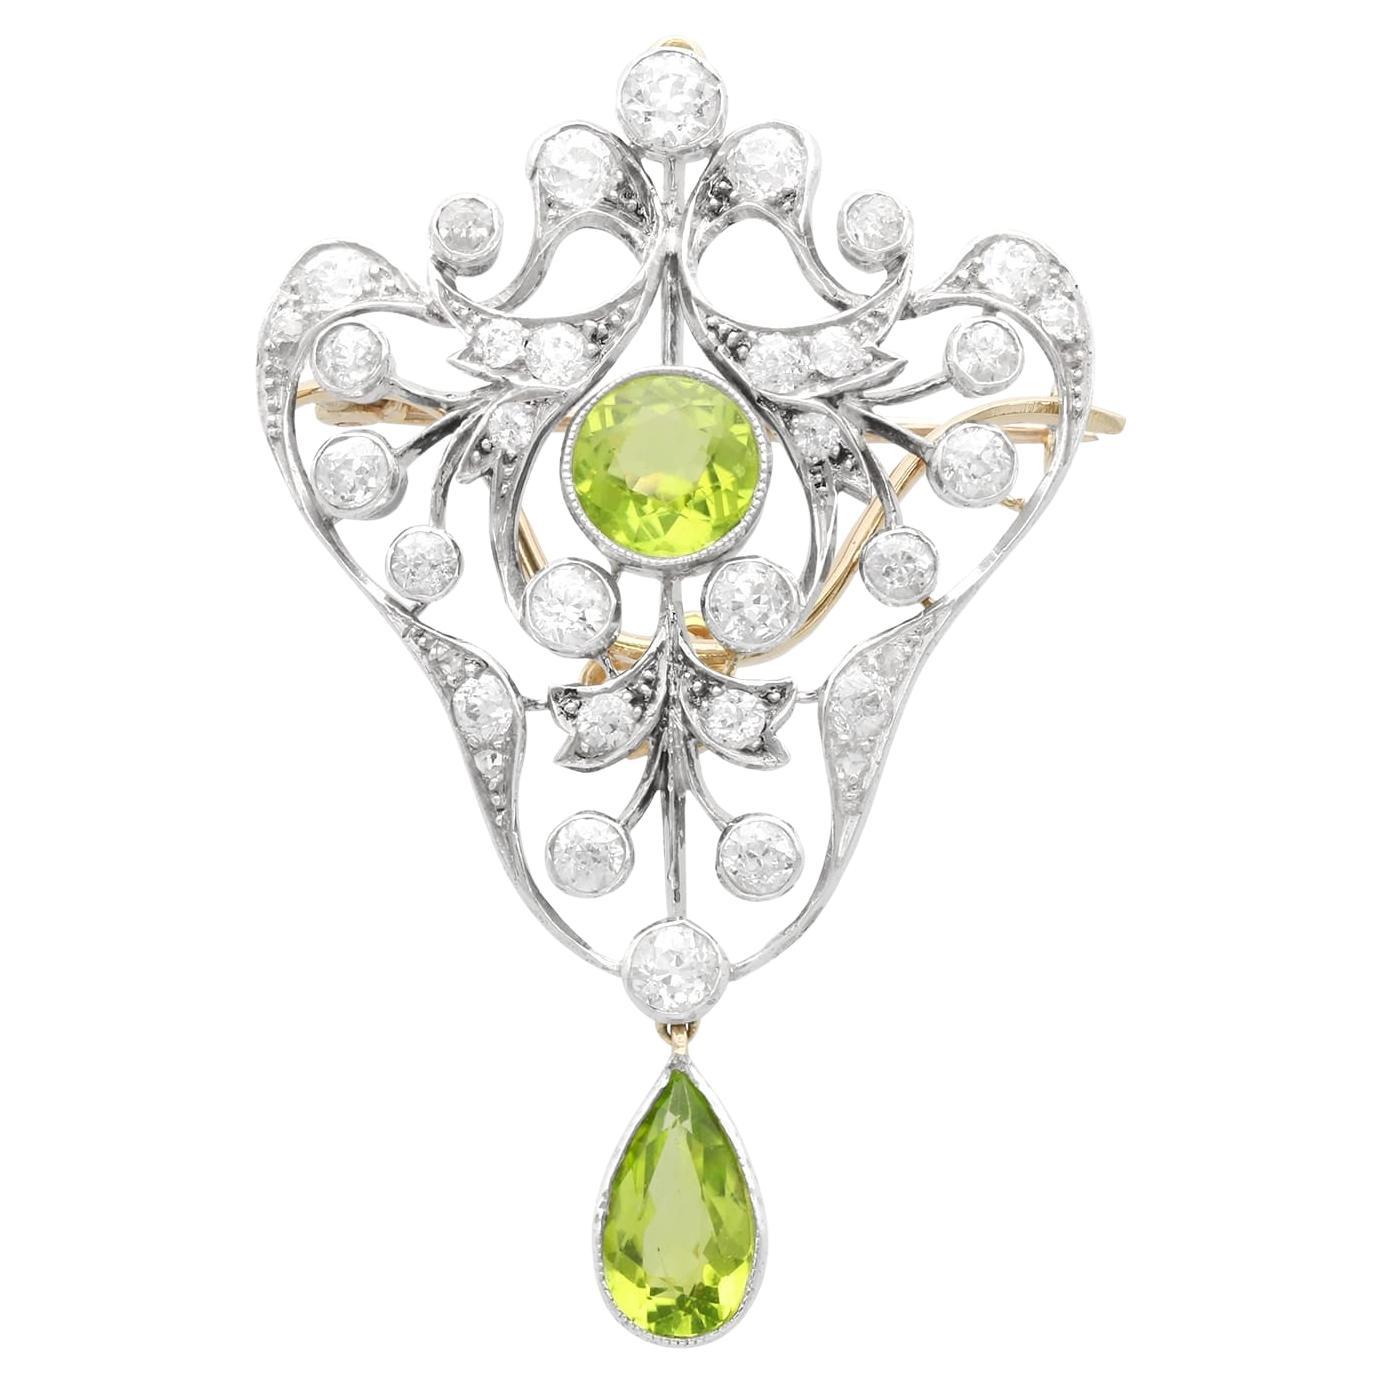 Antique 3.02Ct Peridot and 3.41Ct Diamond, 14k Yellow Gold Pendant / Brooch For Sale